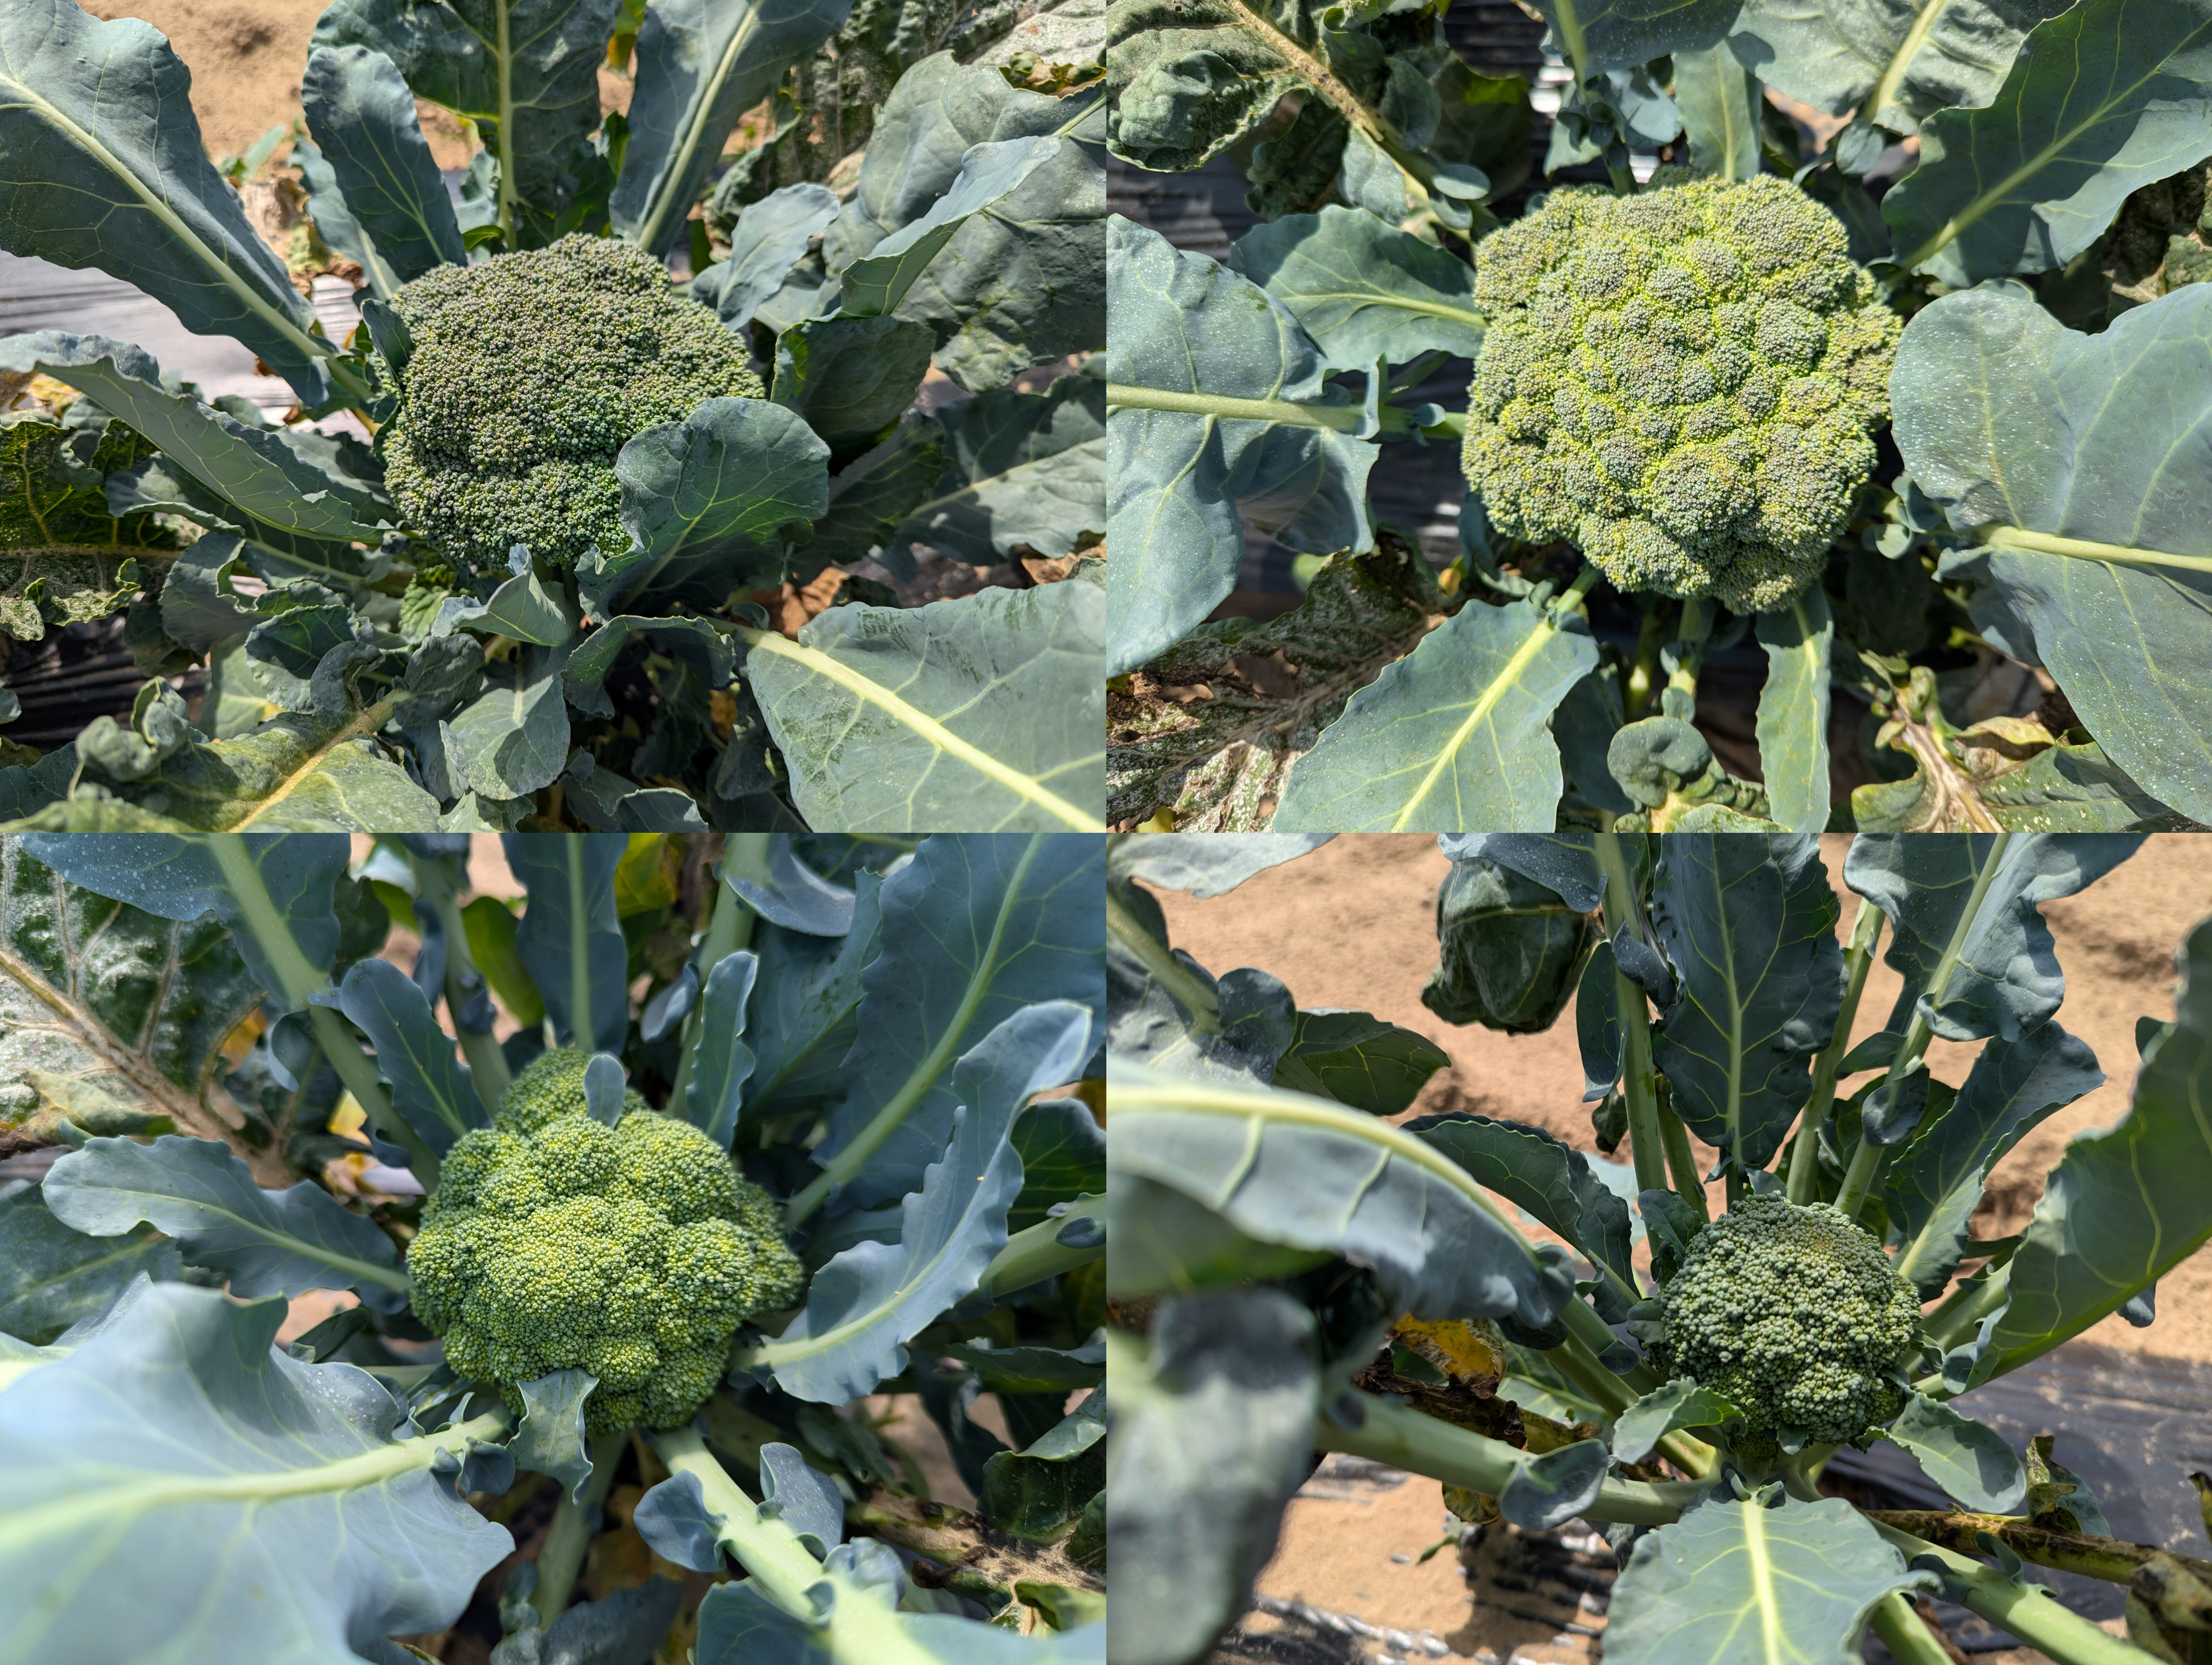 different types of Broccoli